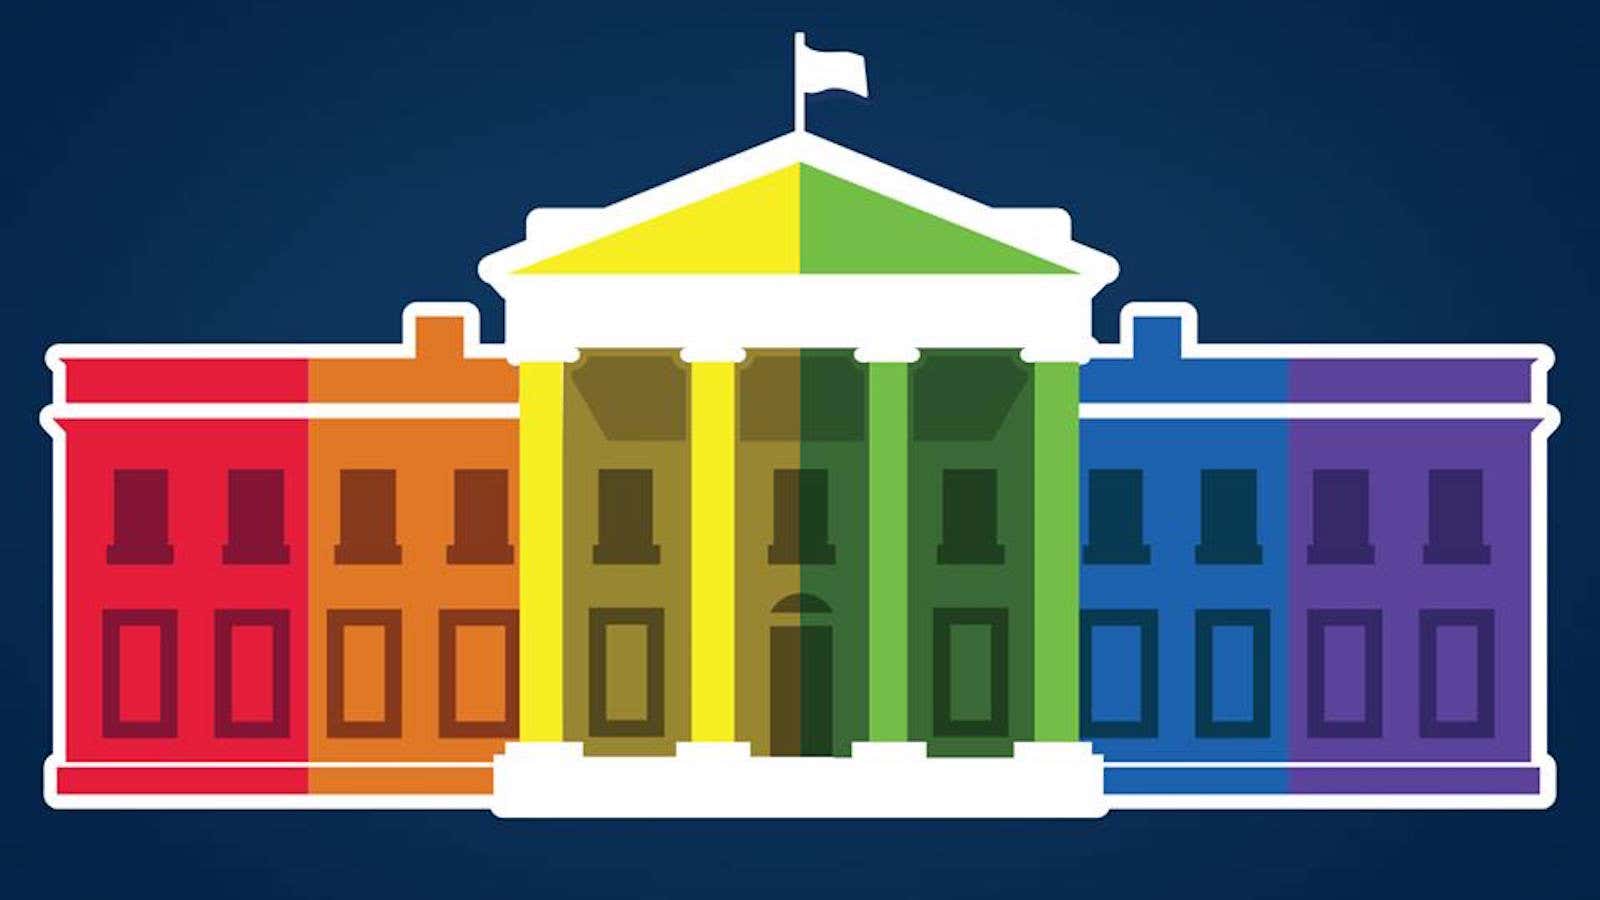 The White House turned rainbow in the new White House profile picture.